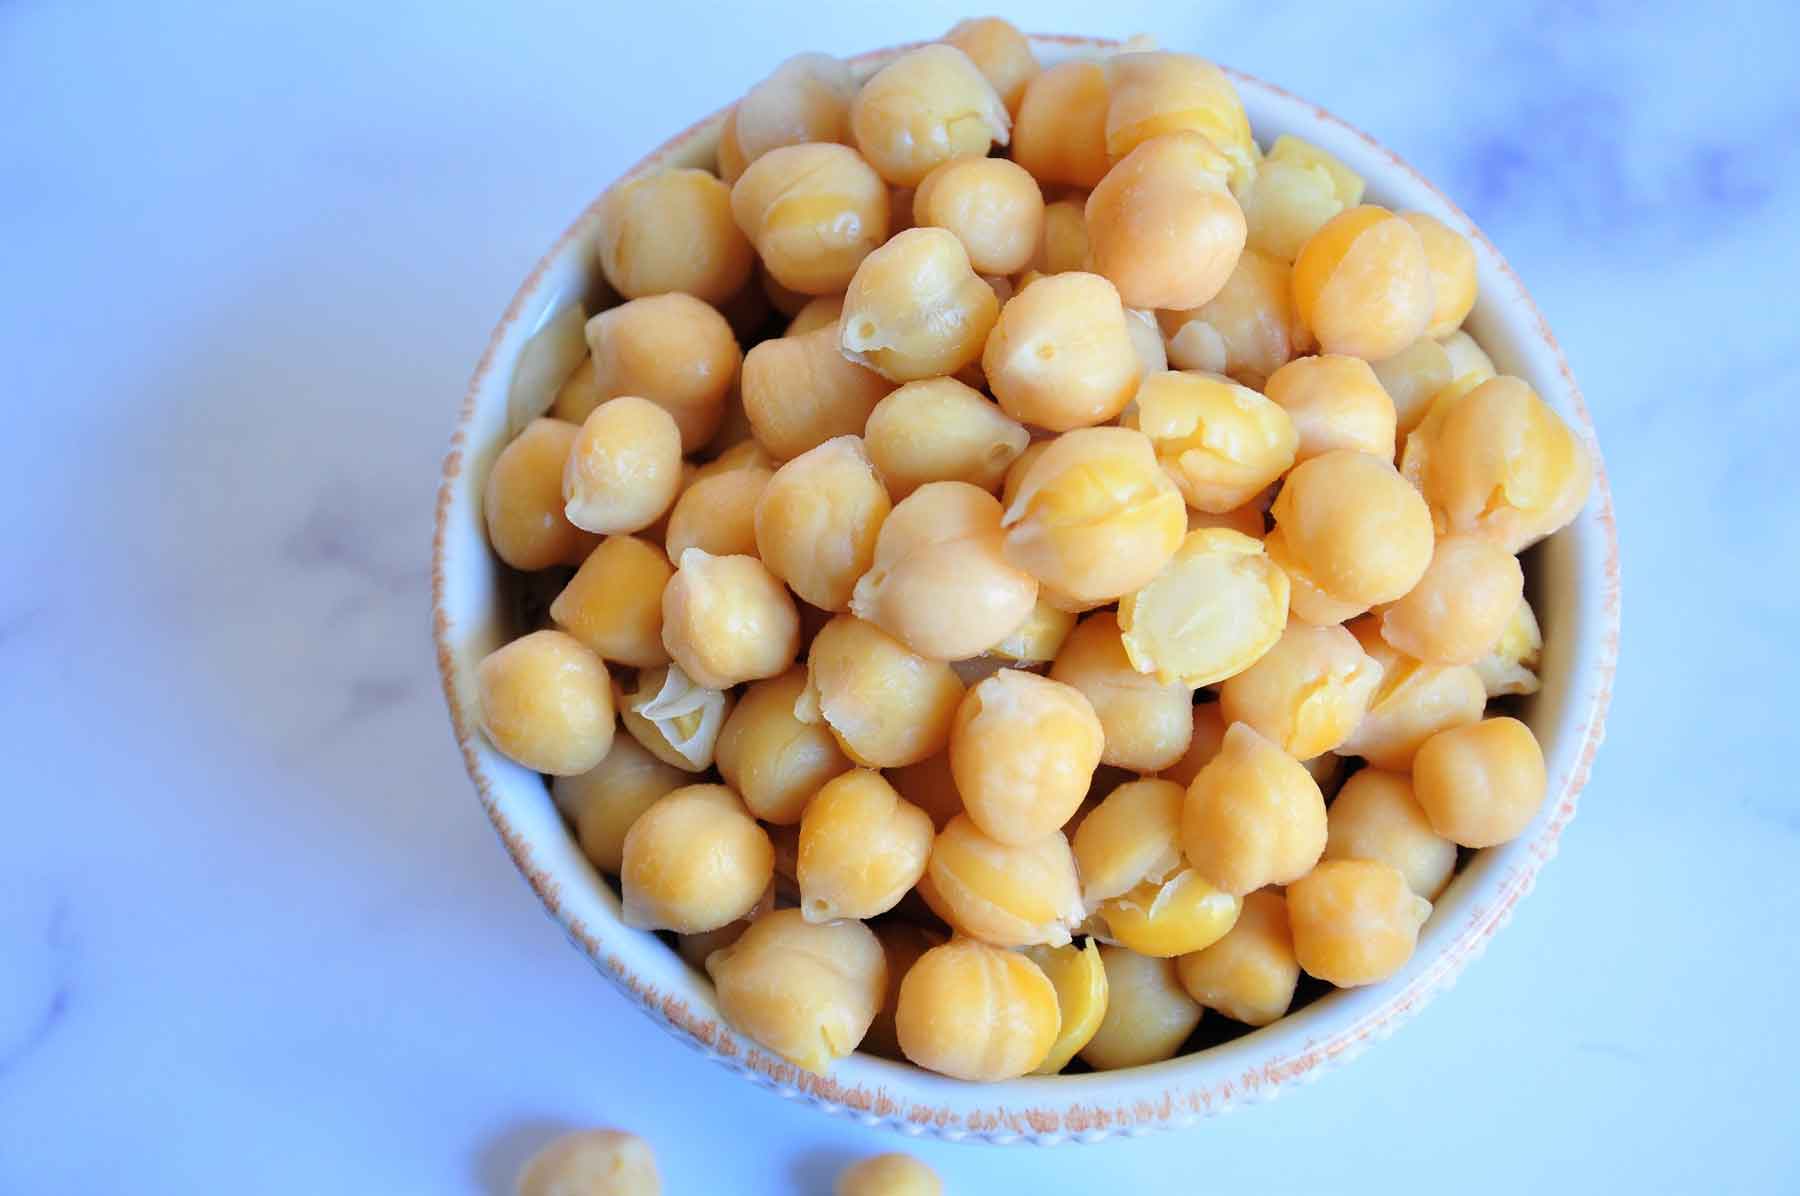 Boiled chickpeas in a bowl.